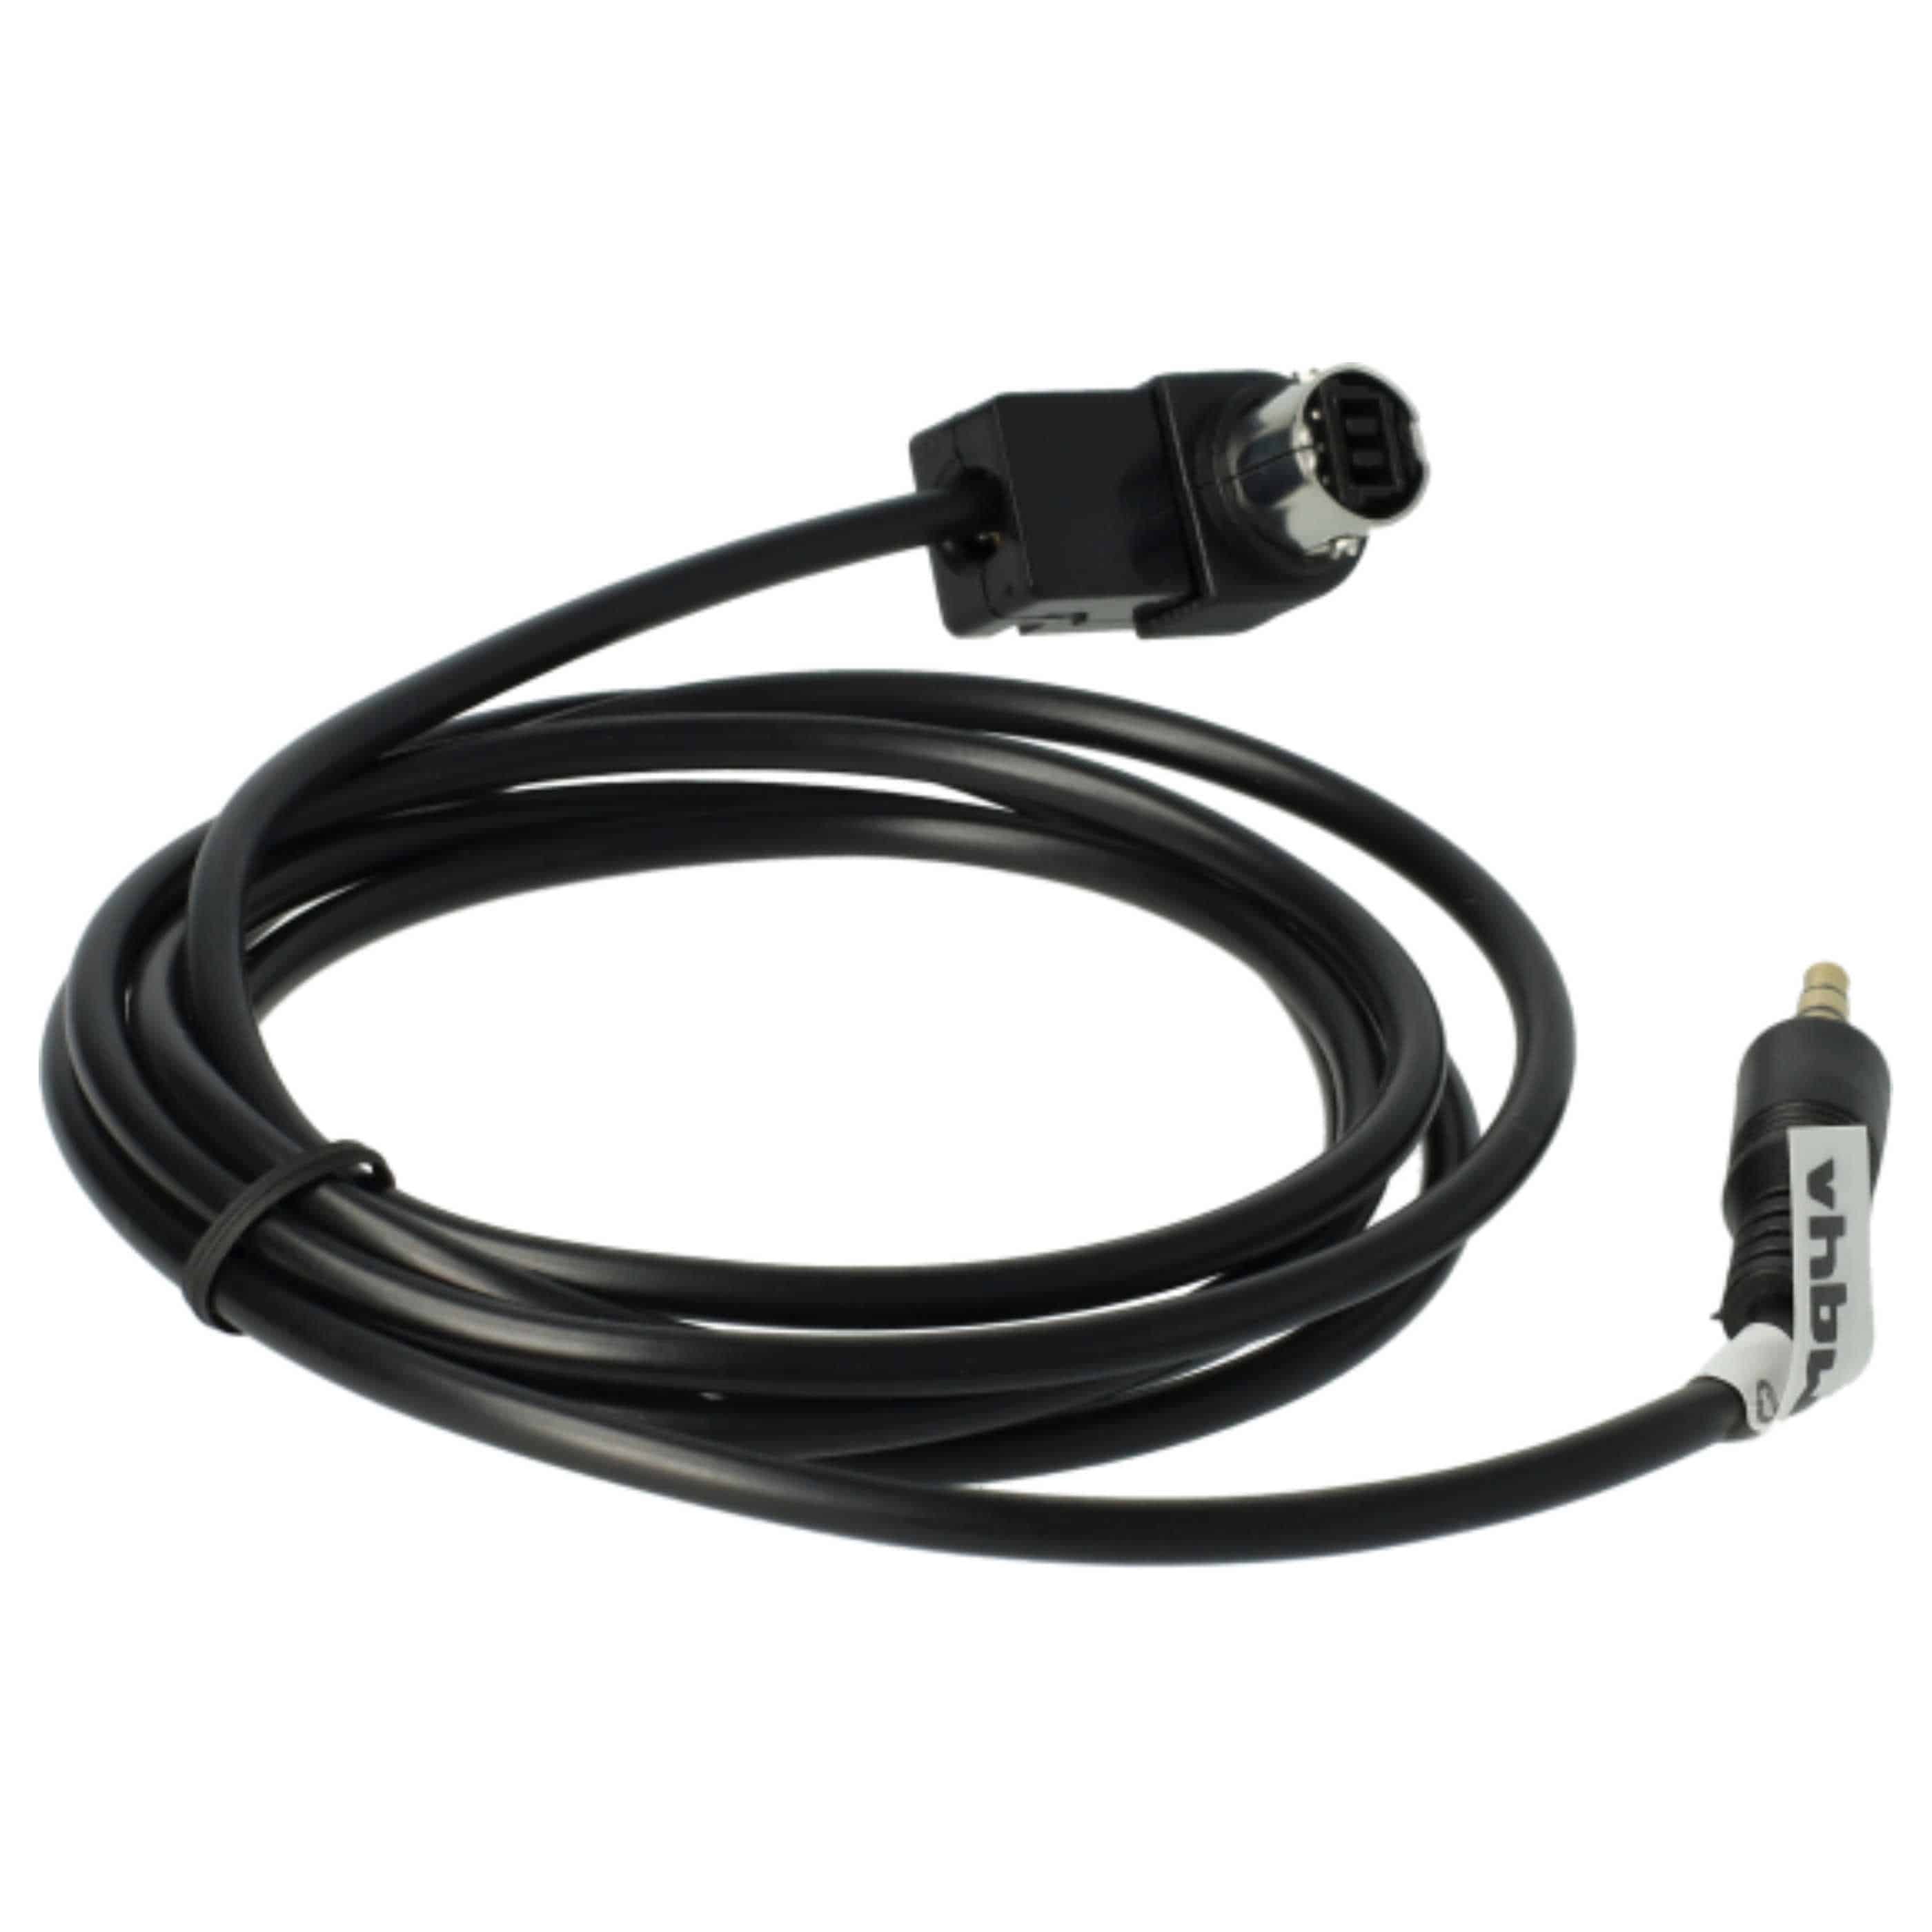 AUX Audio Adapter Cable as Replacement for JVC KS-U58 Car Radio